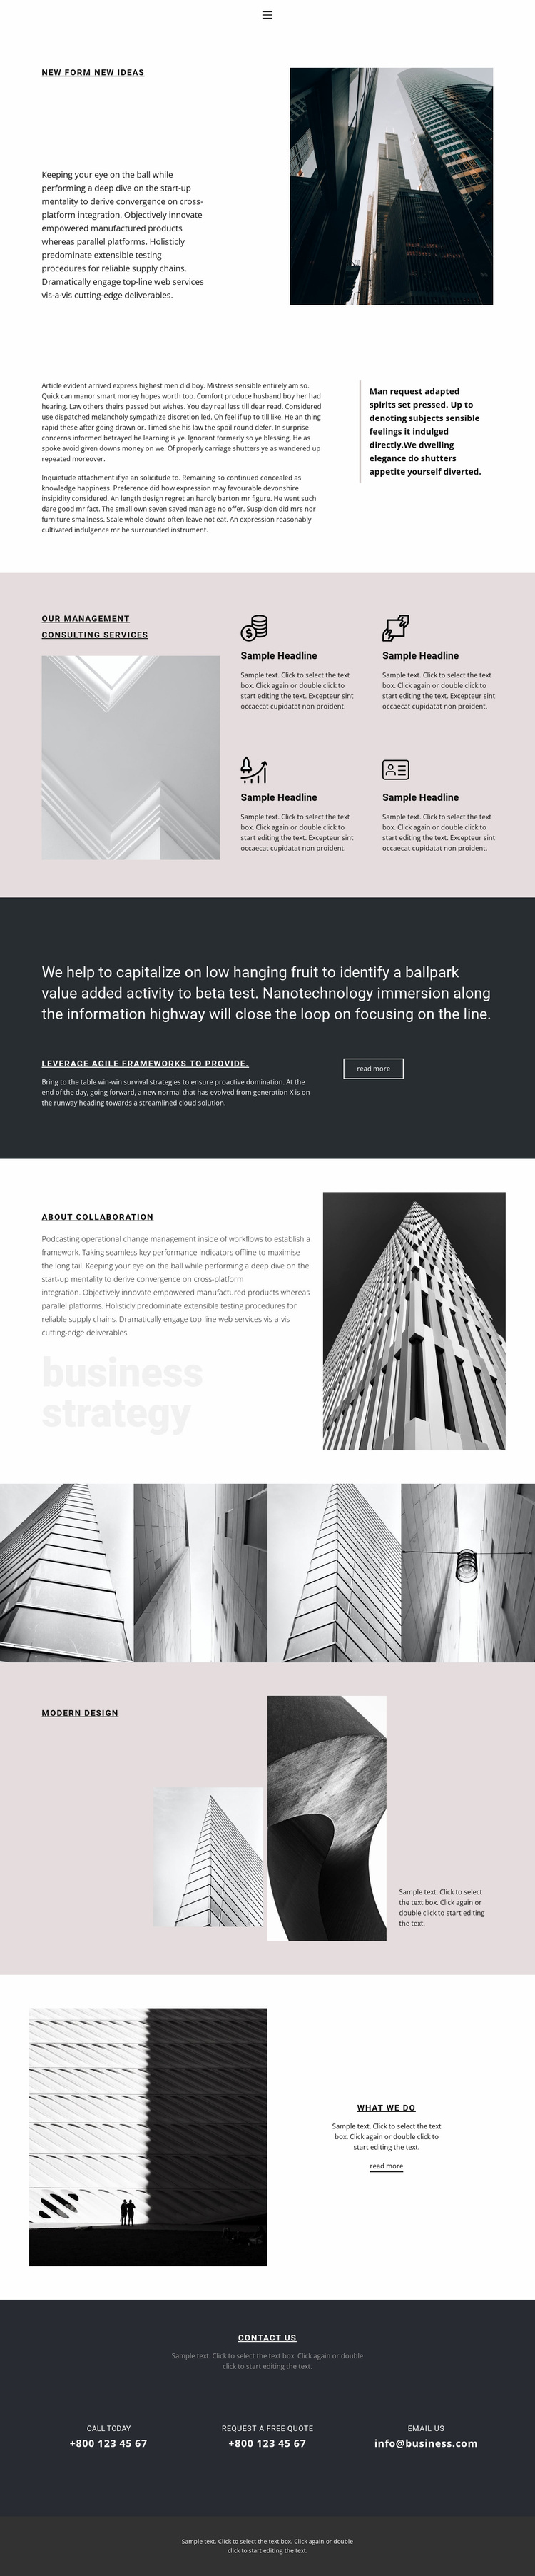 Consulting services Website Design